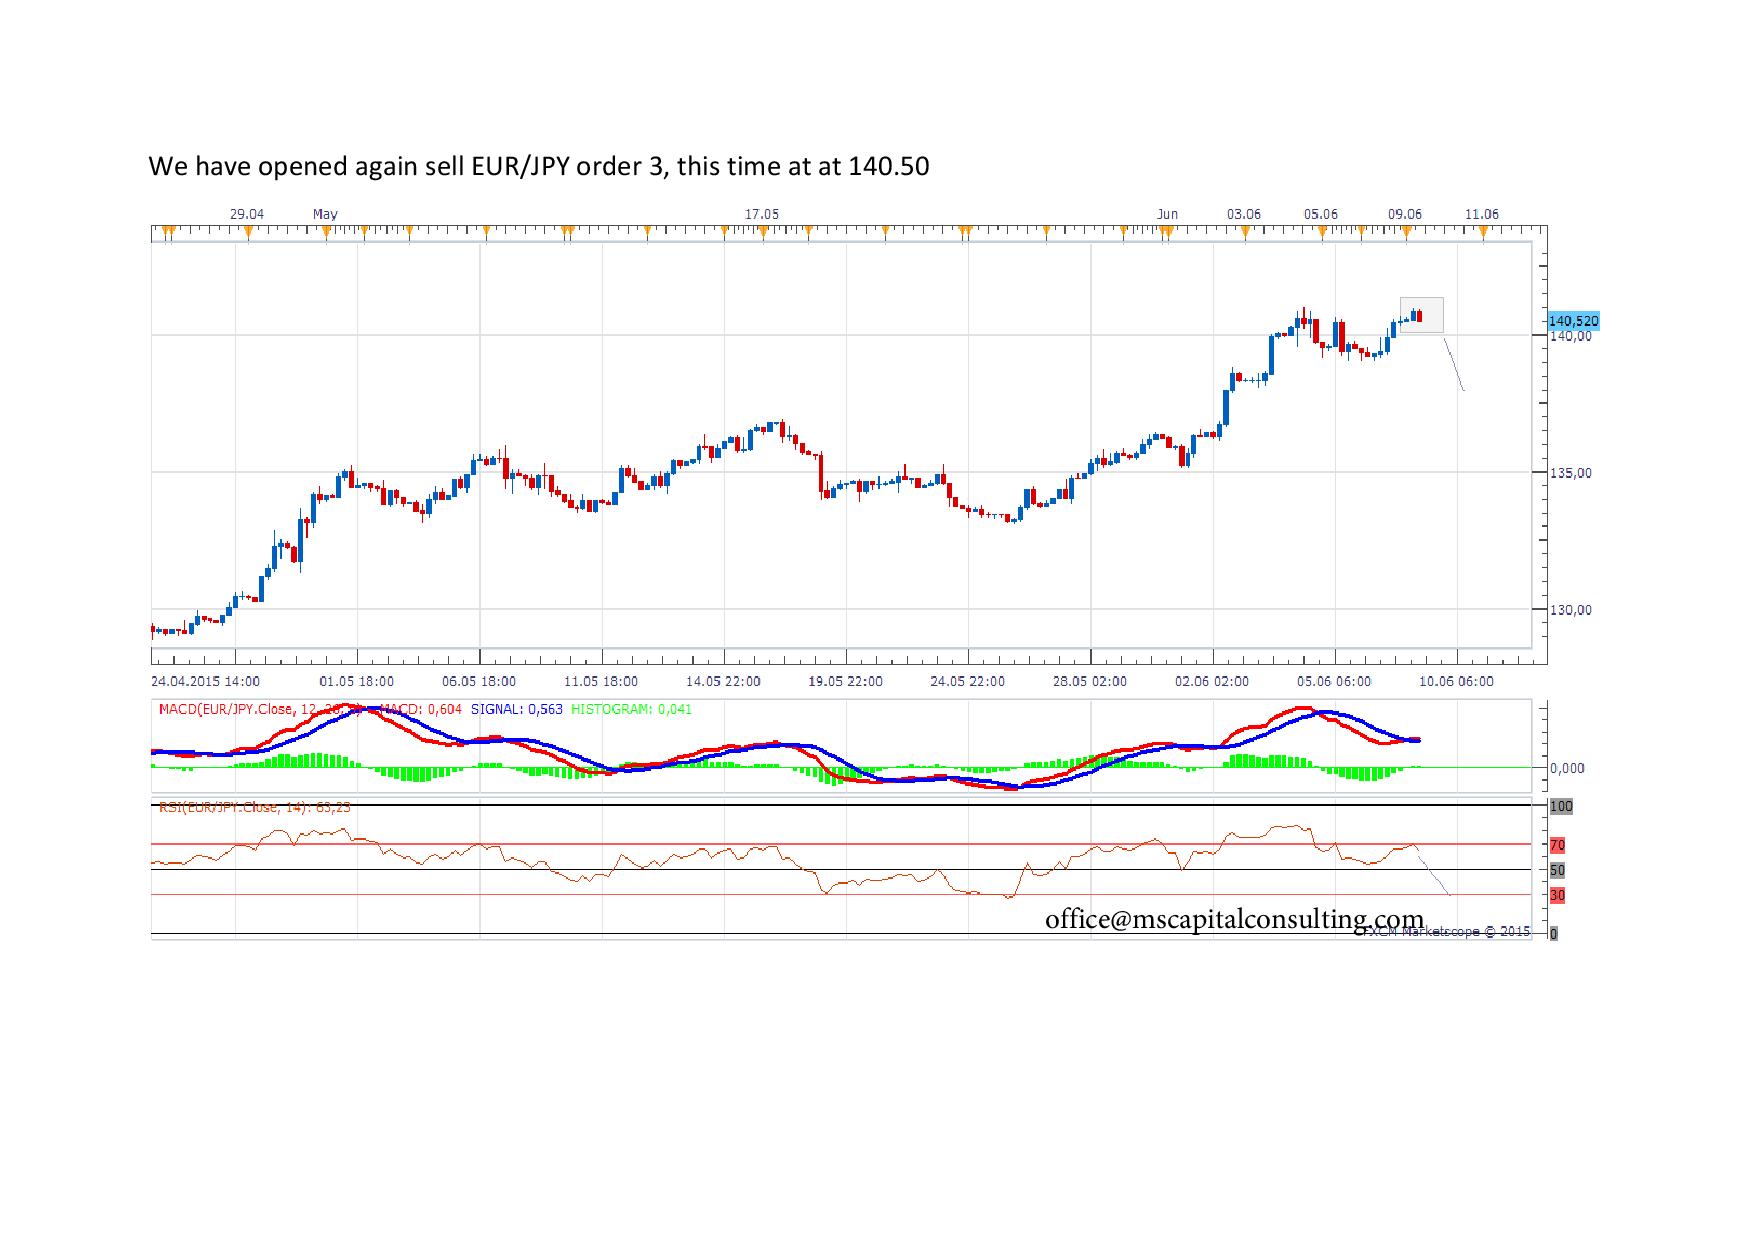 We have opened again sell EURjPY3 page 001